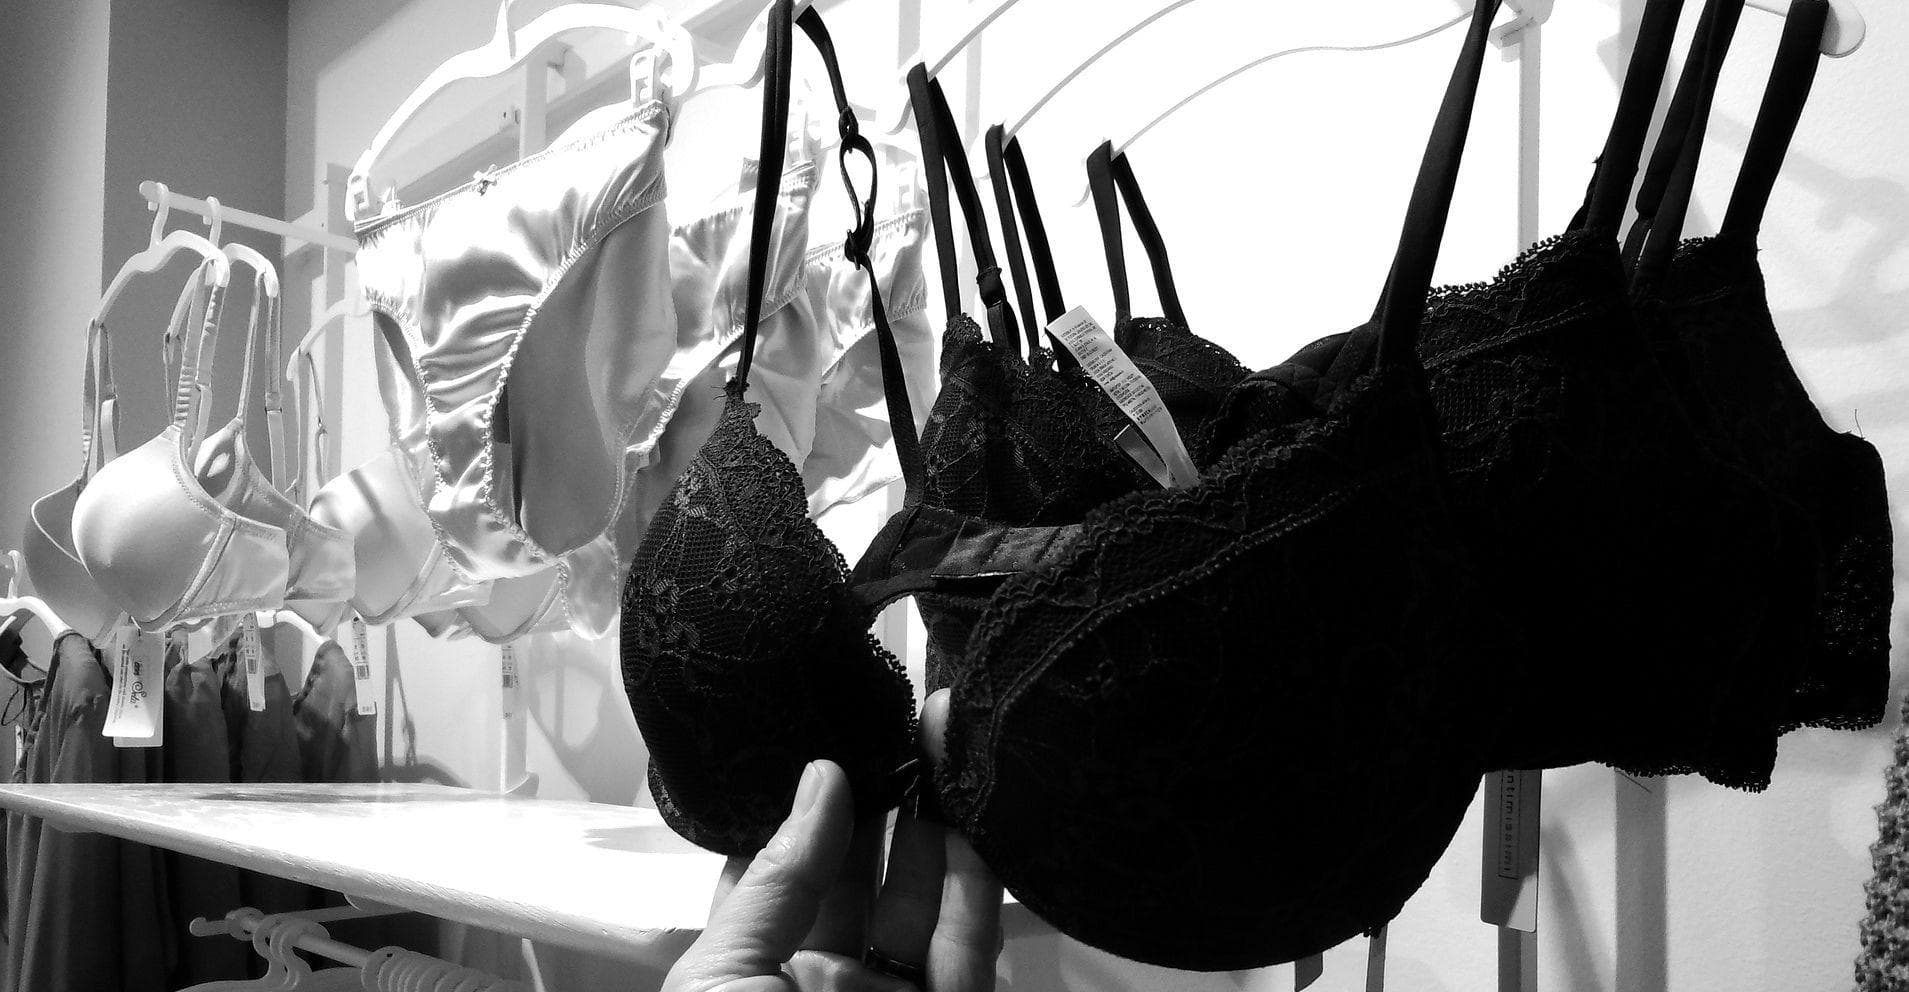 TIL the inventor of the bra, Caresse Crosby, came up with the idea